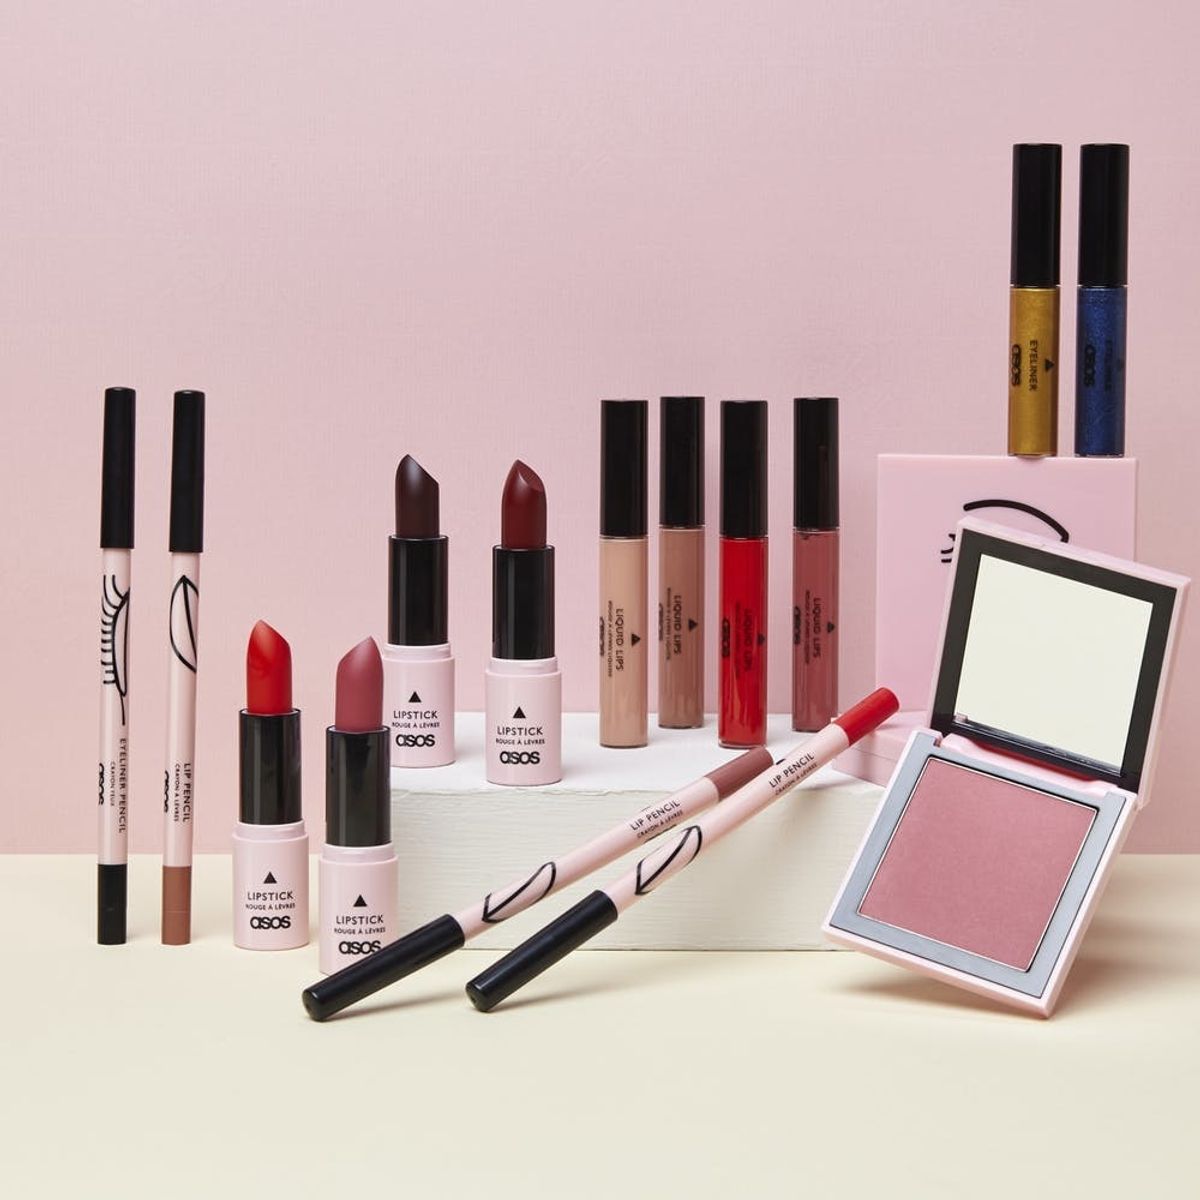 ASOS Is Launching a Beauty Line Full of Products for Less Than $20